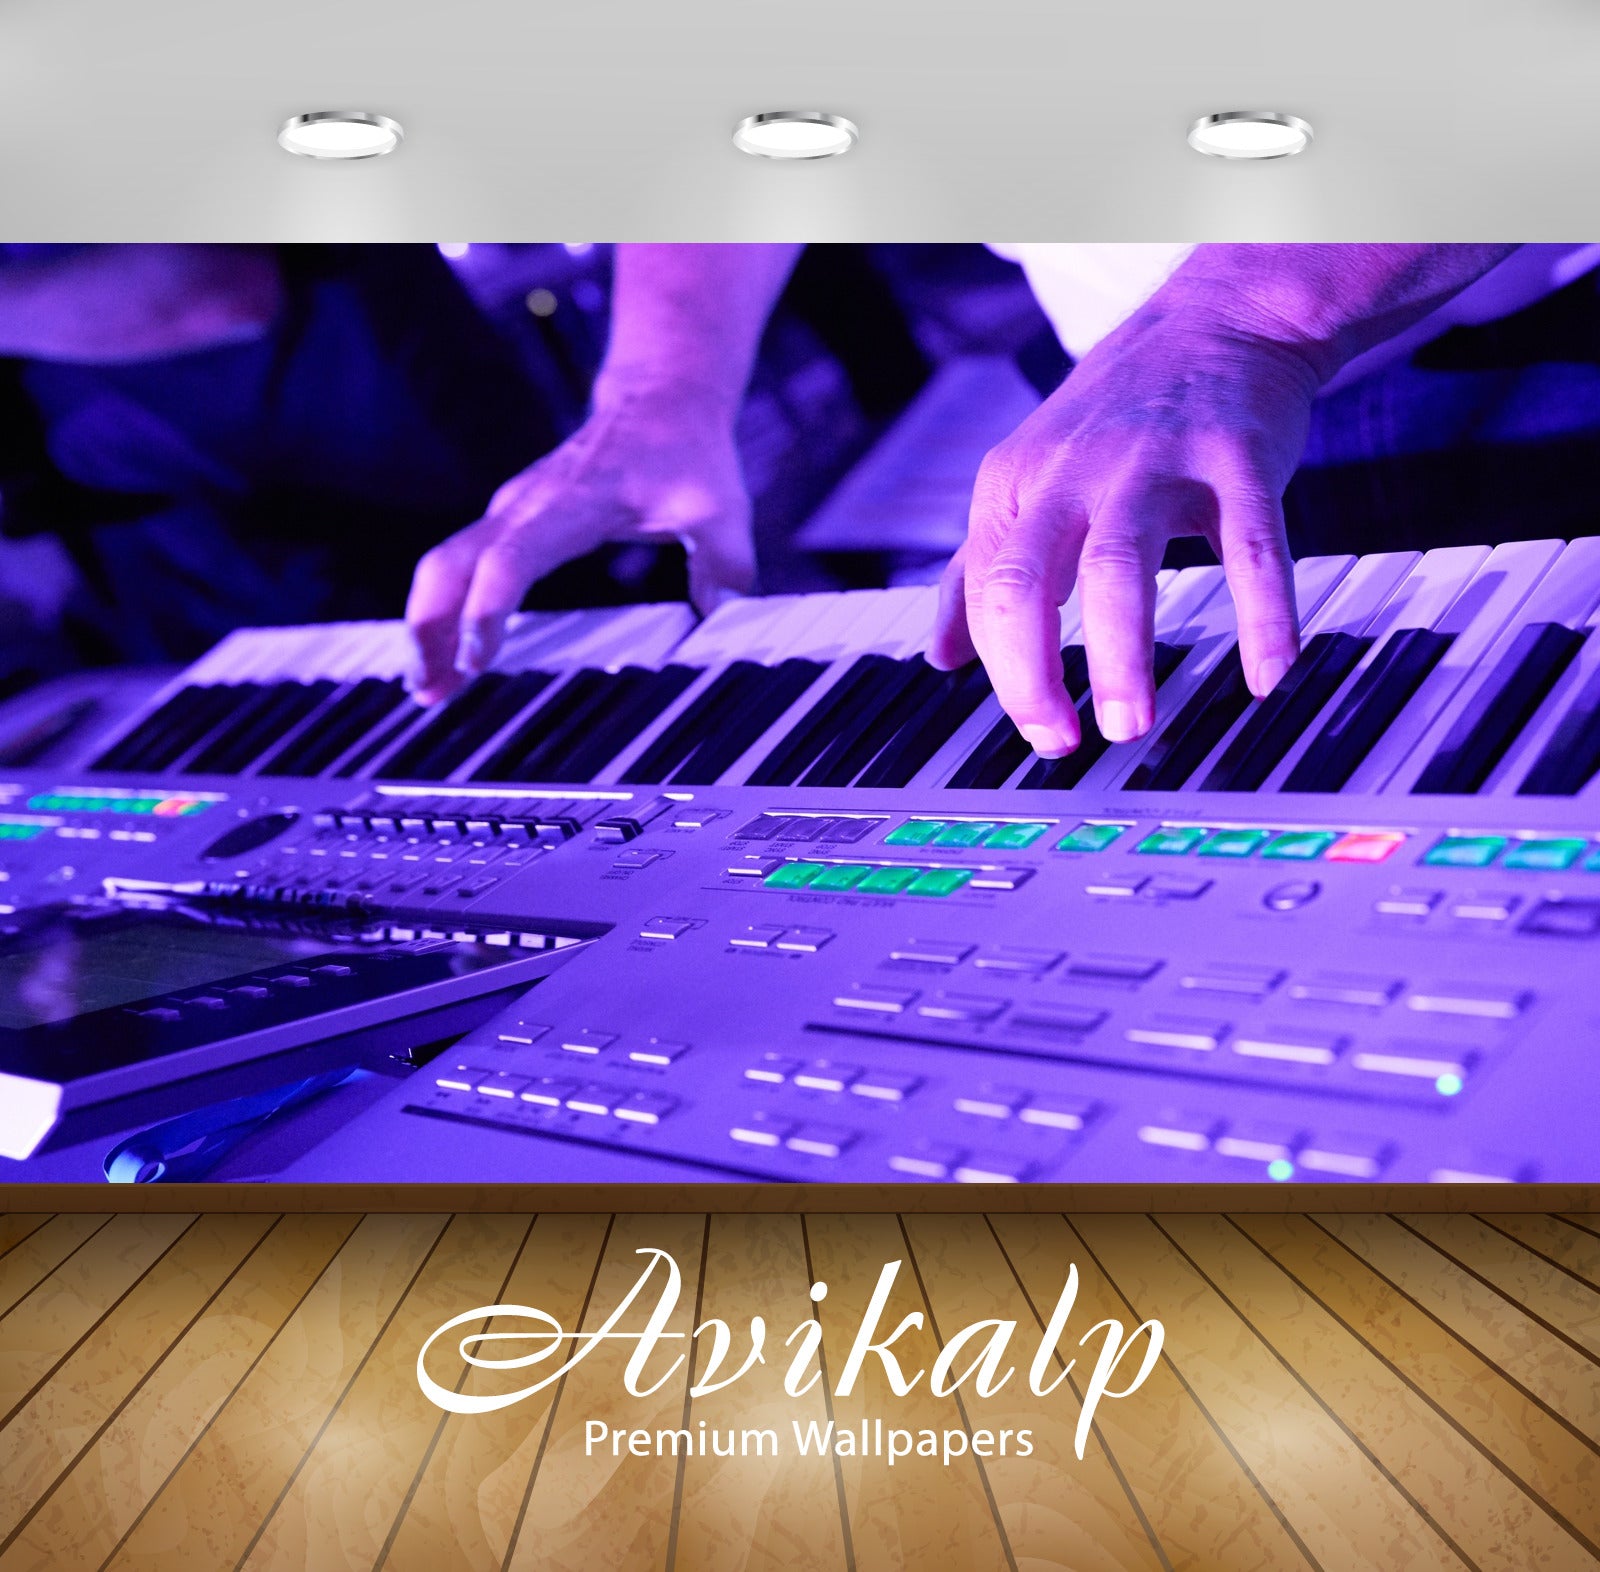 Avikalp Exclusive Awi4709 Keyboard Music Instrument Song Full HD Wallpapers for Living room, Hall, K